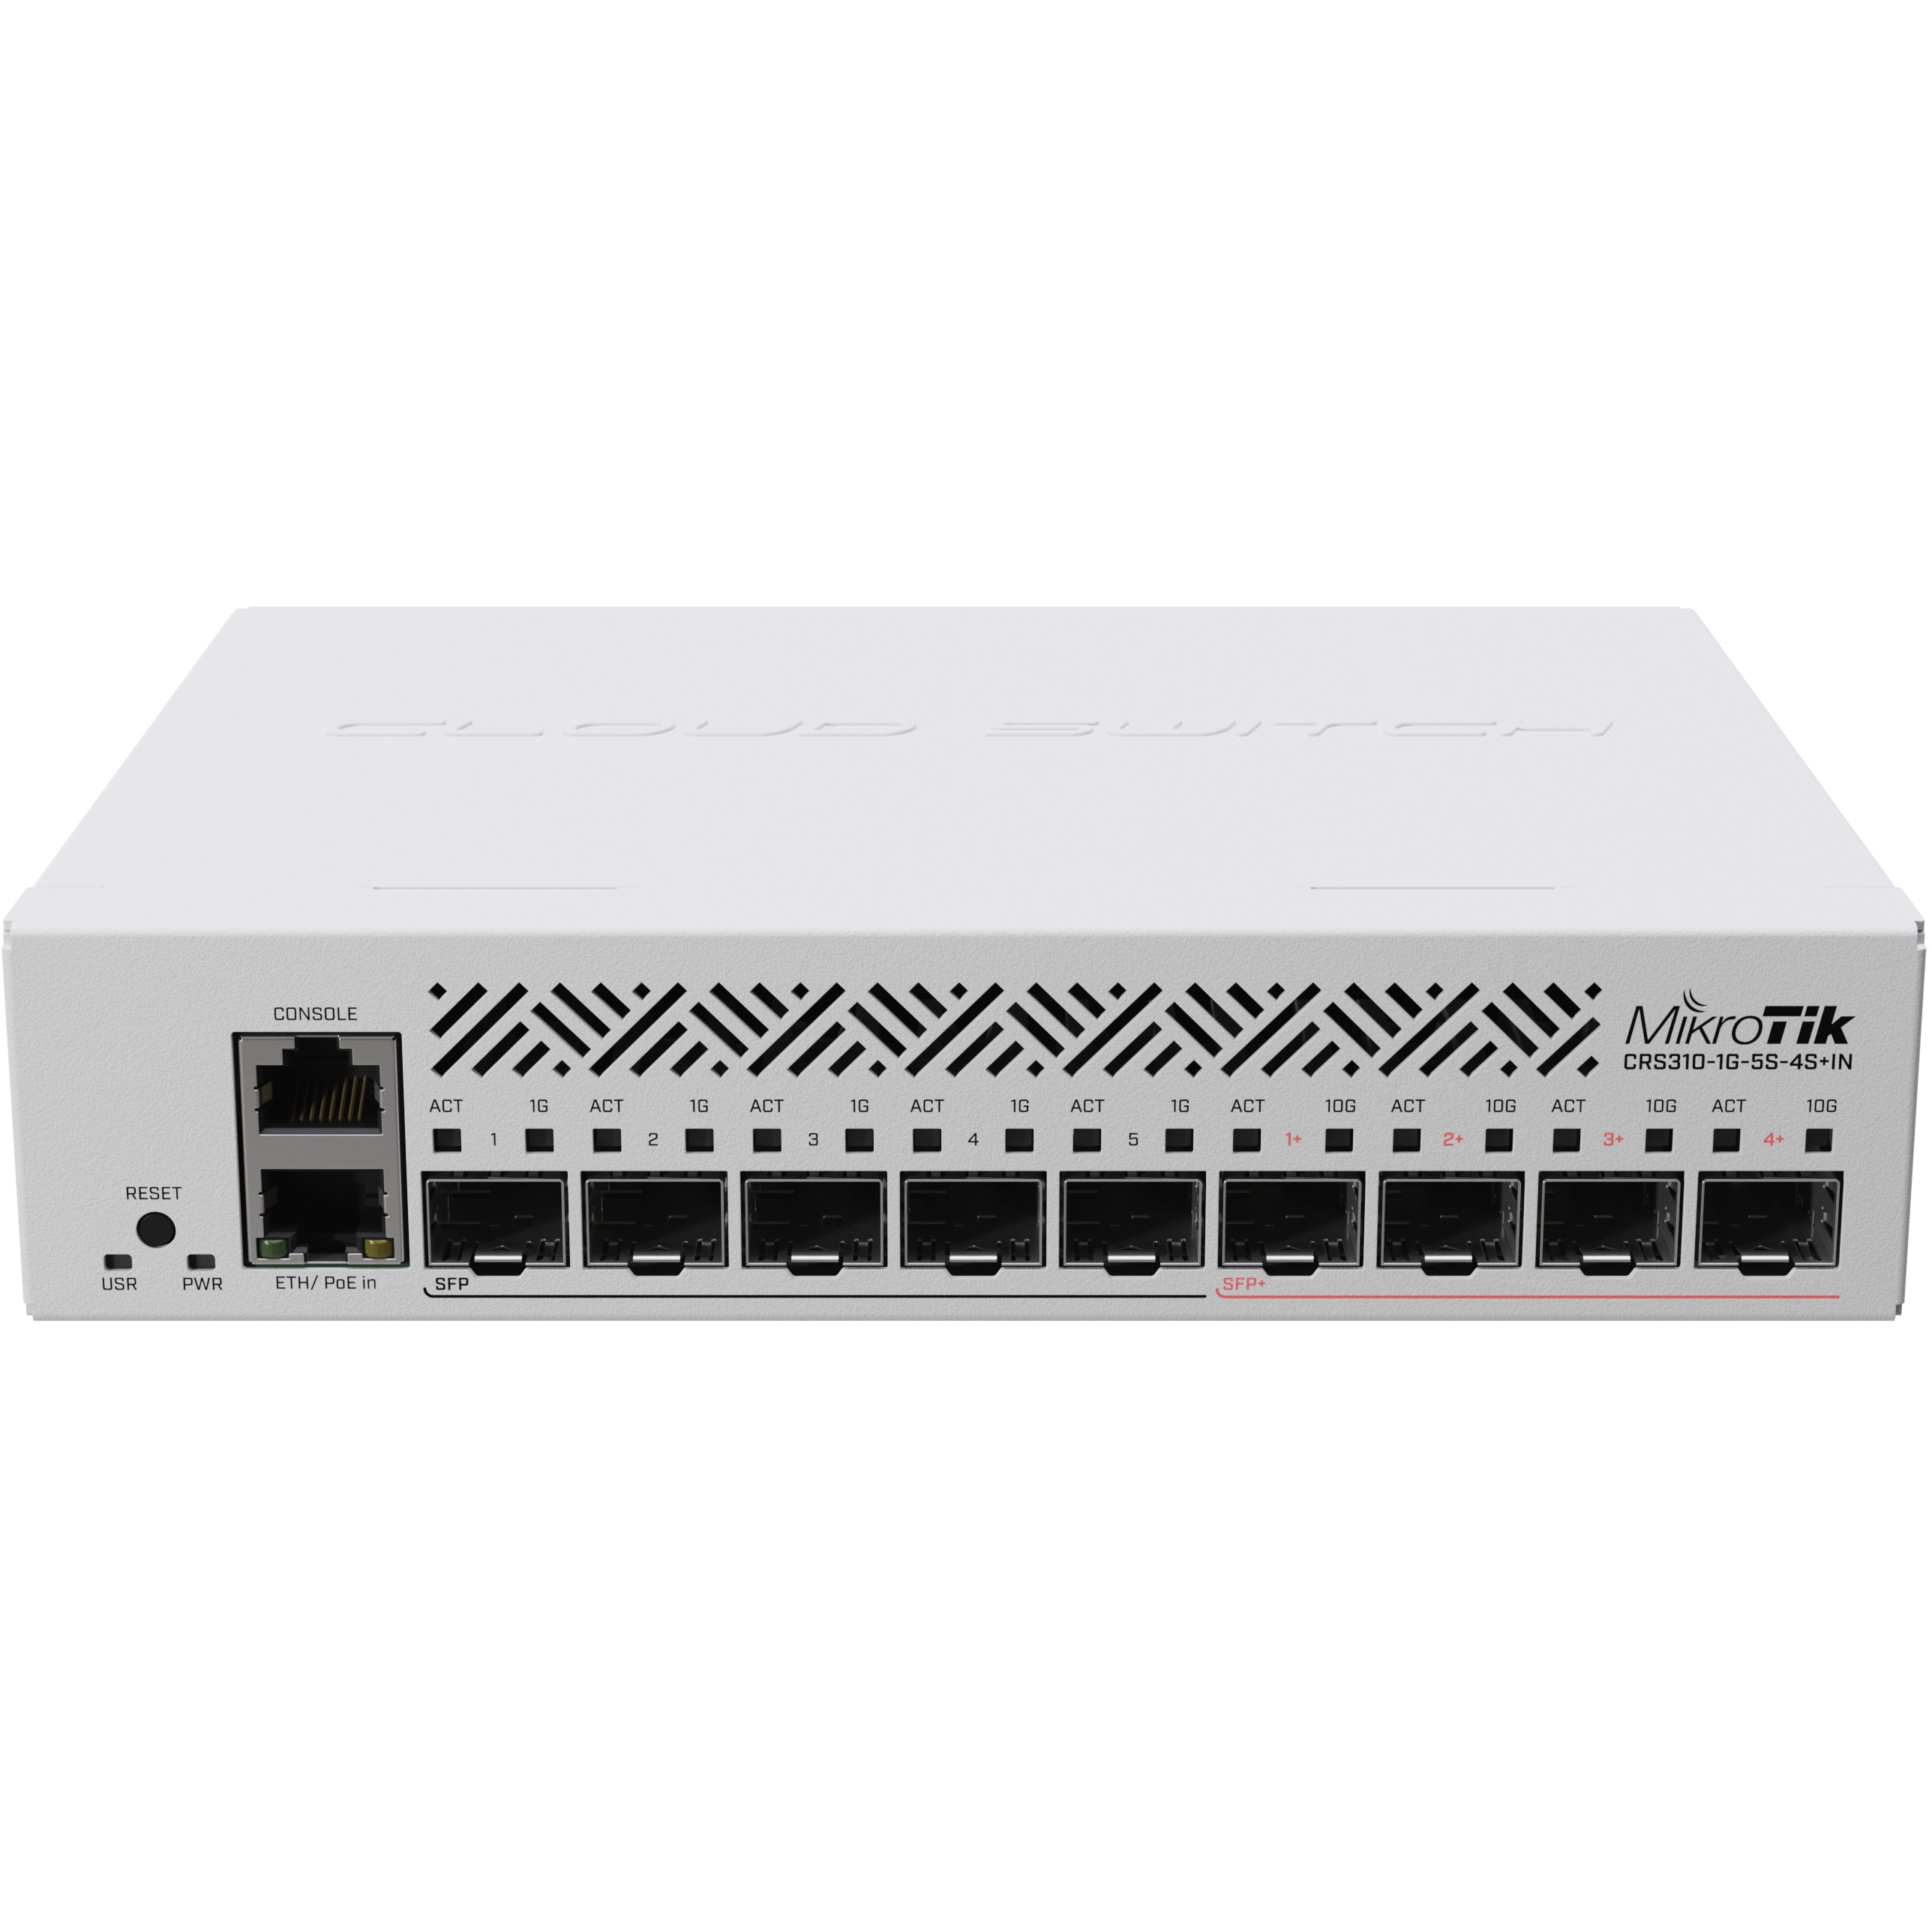 MIKROTIK Mikrotik CRS310-1G-5S-4S+IN switch Netzwerk 2 Switching Hubs network Router